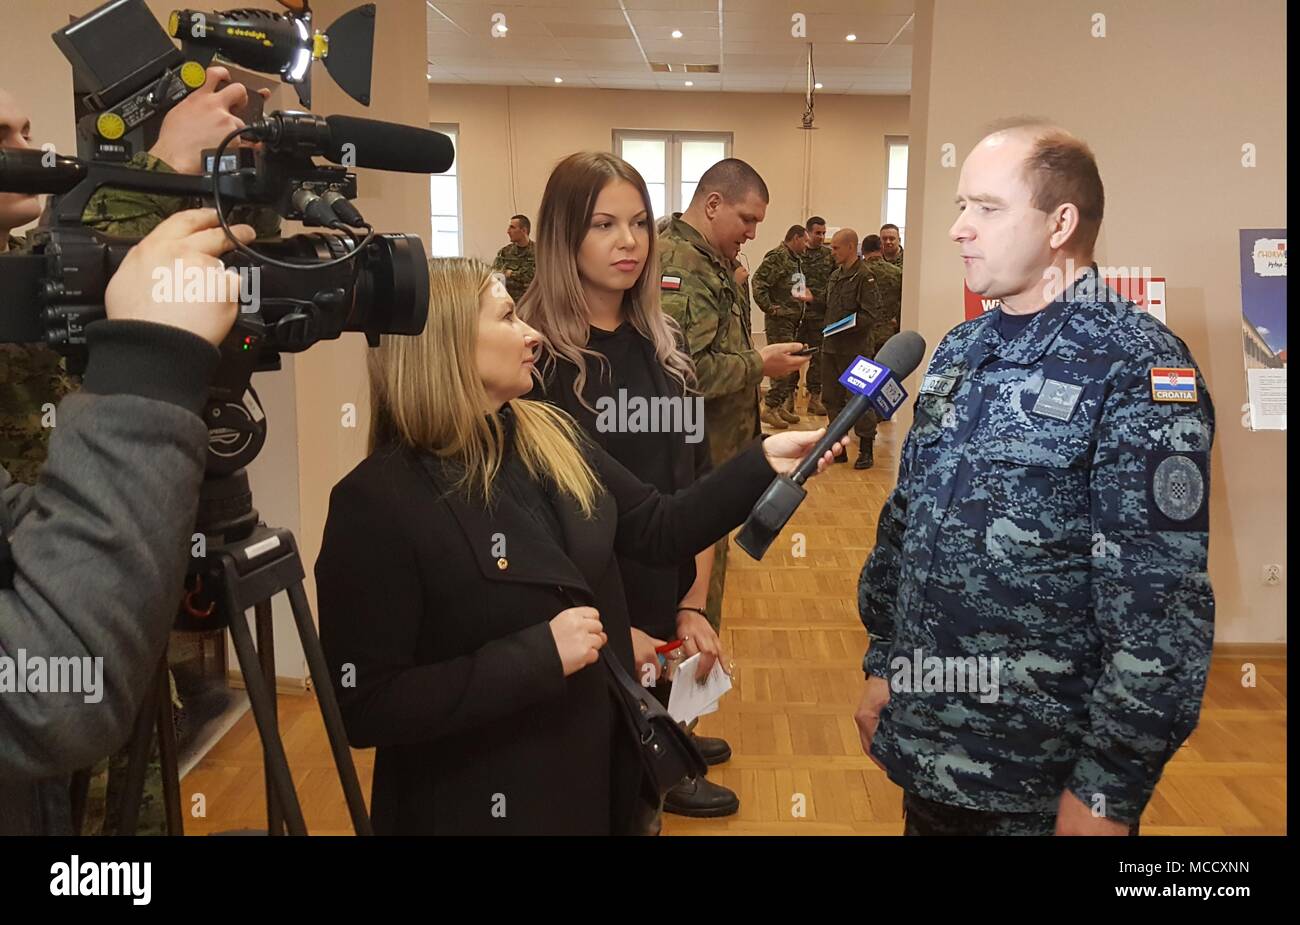 Croatian Navy Capt. Jozić, military attaché to Poland, conducts an interview with Polish media TVP3 explaining the Croatian cultural heritage events, Sylwia Pindor (center) serves as linguist during the interview at the Polish 15th Mechanized Brigade headquarters at Giżycko, Poland, Feb. 12, 2018. The celebration allowed the ambassador to express gratitude to Polish leaders and shared Croatian culture with the community leaders in attendance. The unique, multinational battle group is comprised of U.S., U.K., Croatian and Romanian soldiers serve with the Polish 15th Mechanized Brigade as a dete Stock Photo